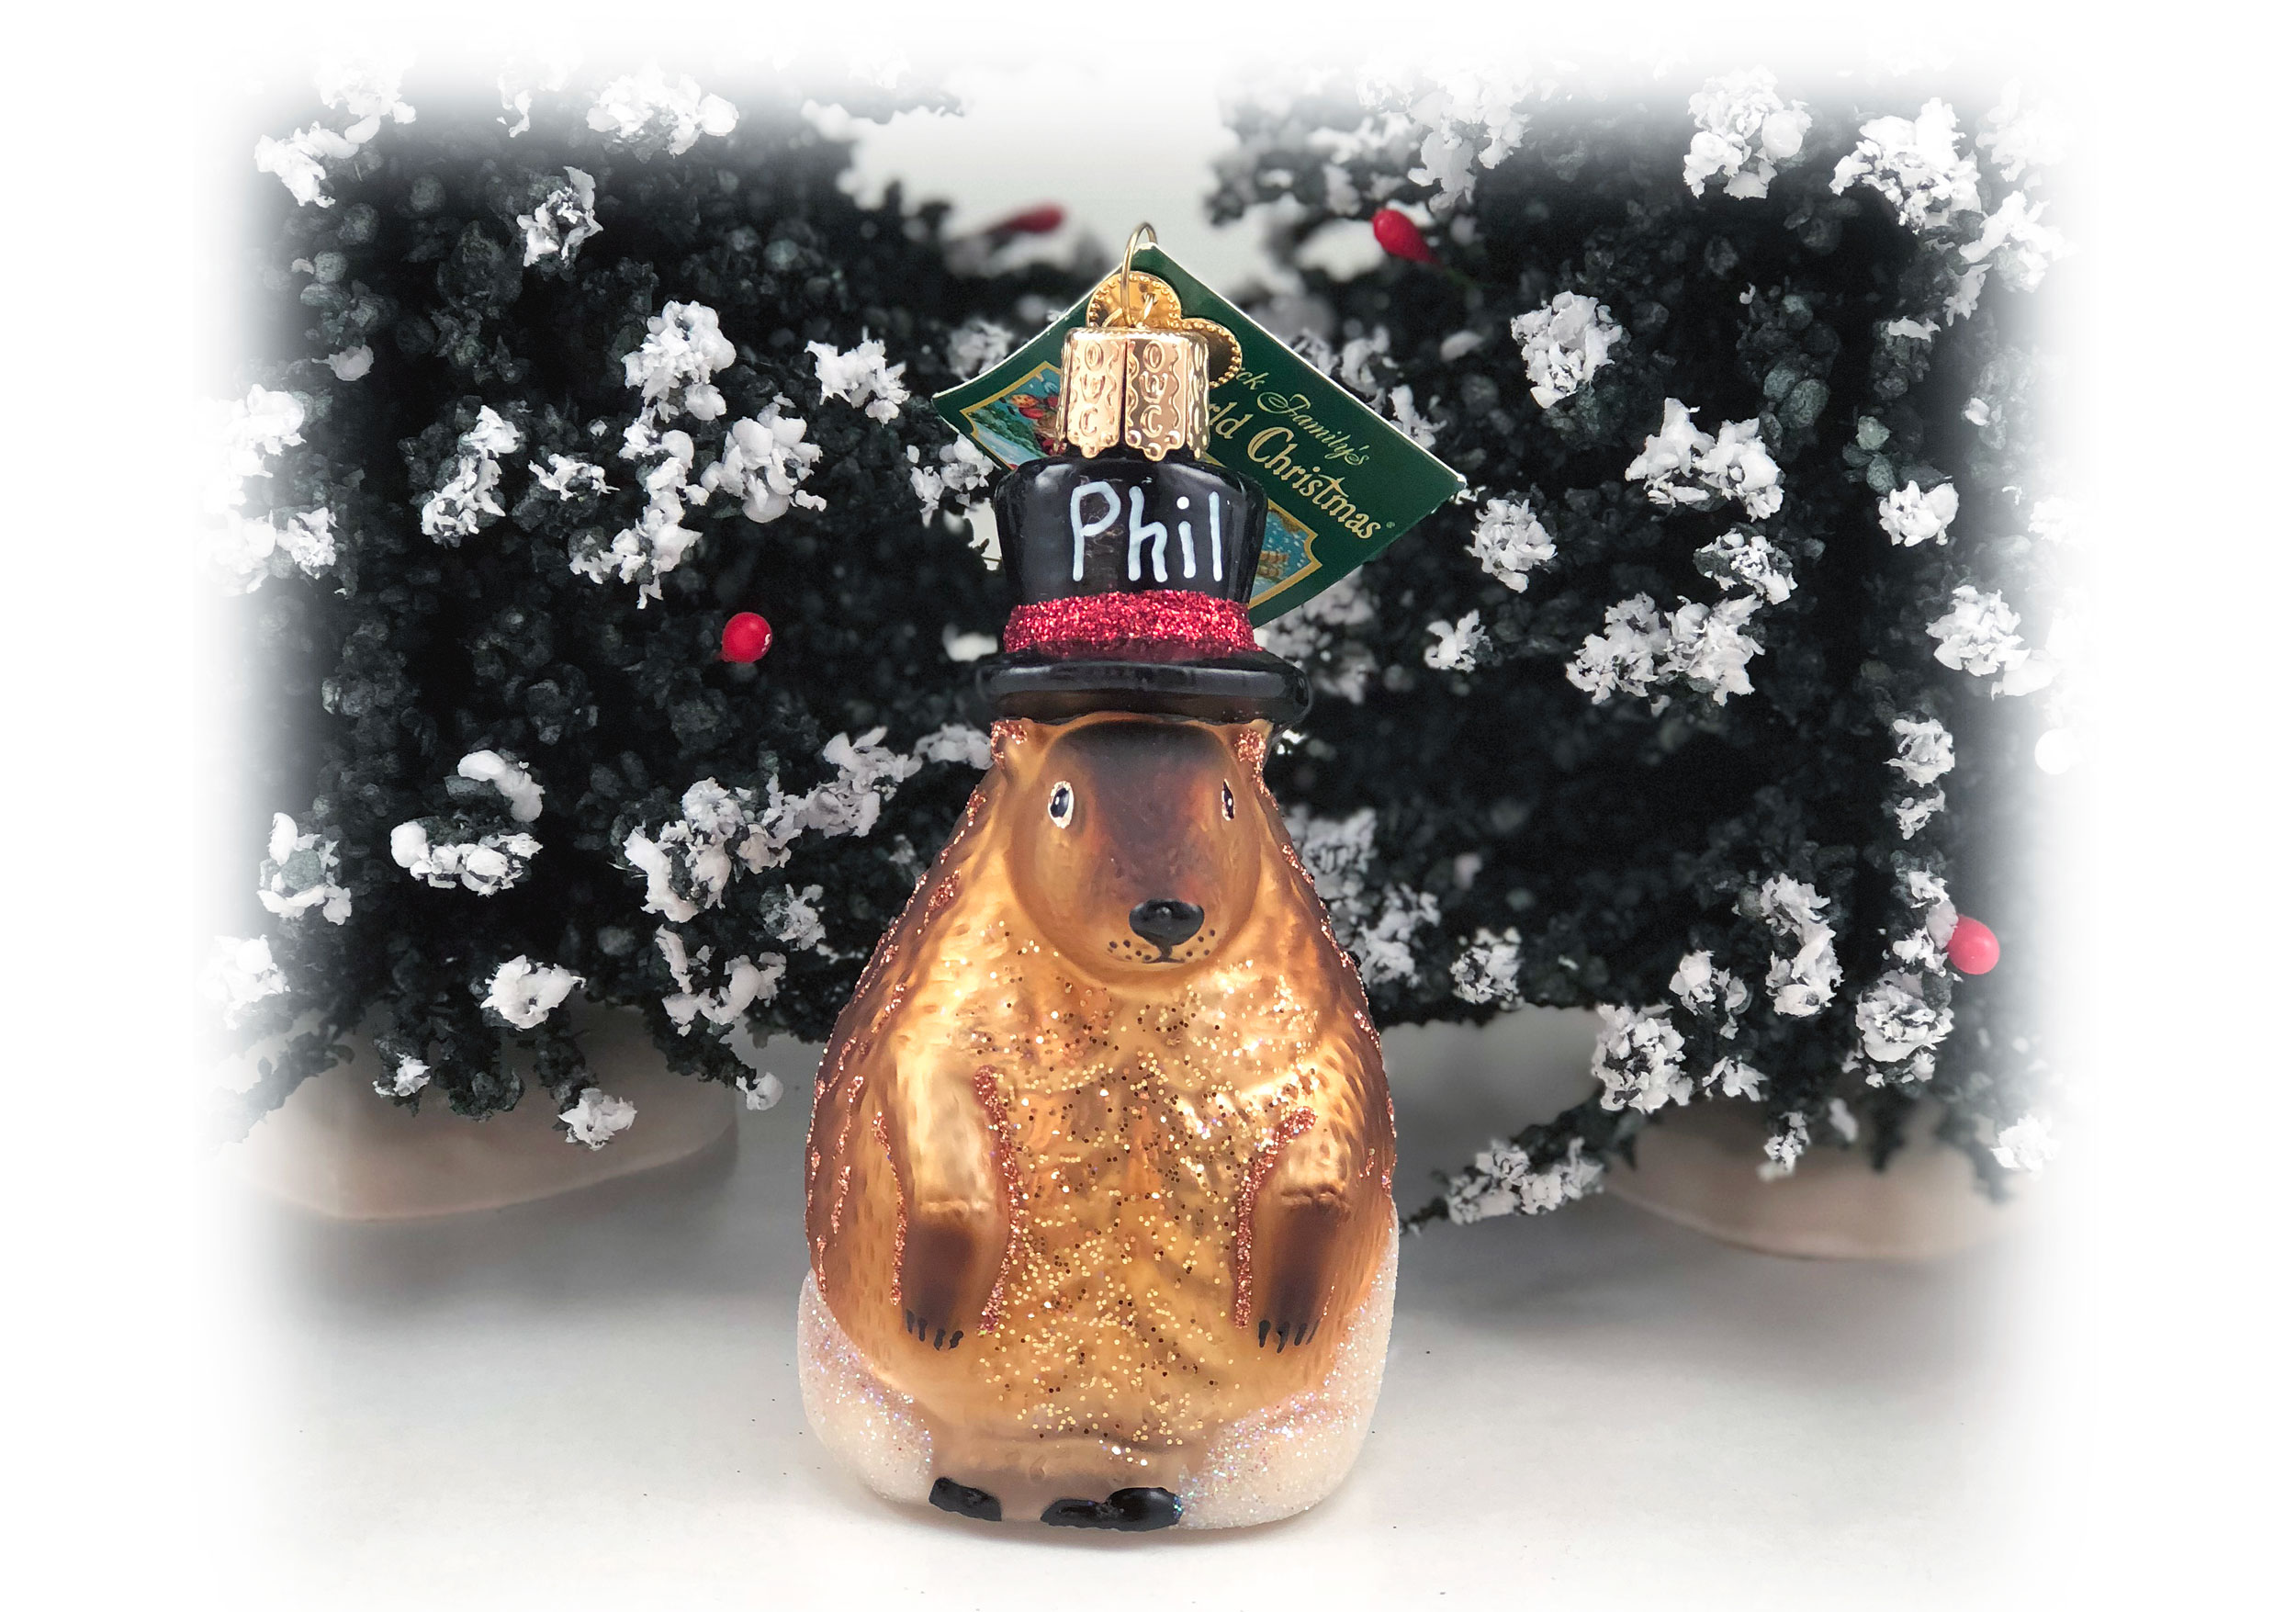 A ornament of a groundhog with Phil written on his hat. | OrnamentShop.com